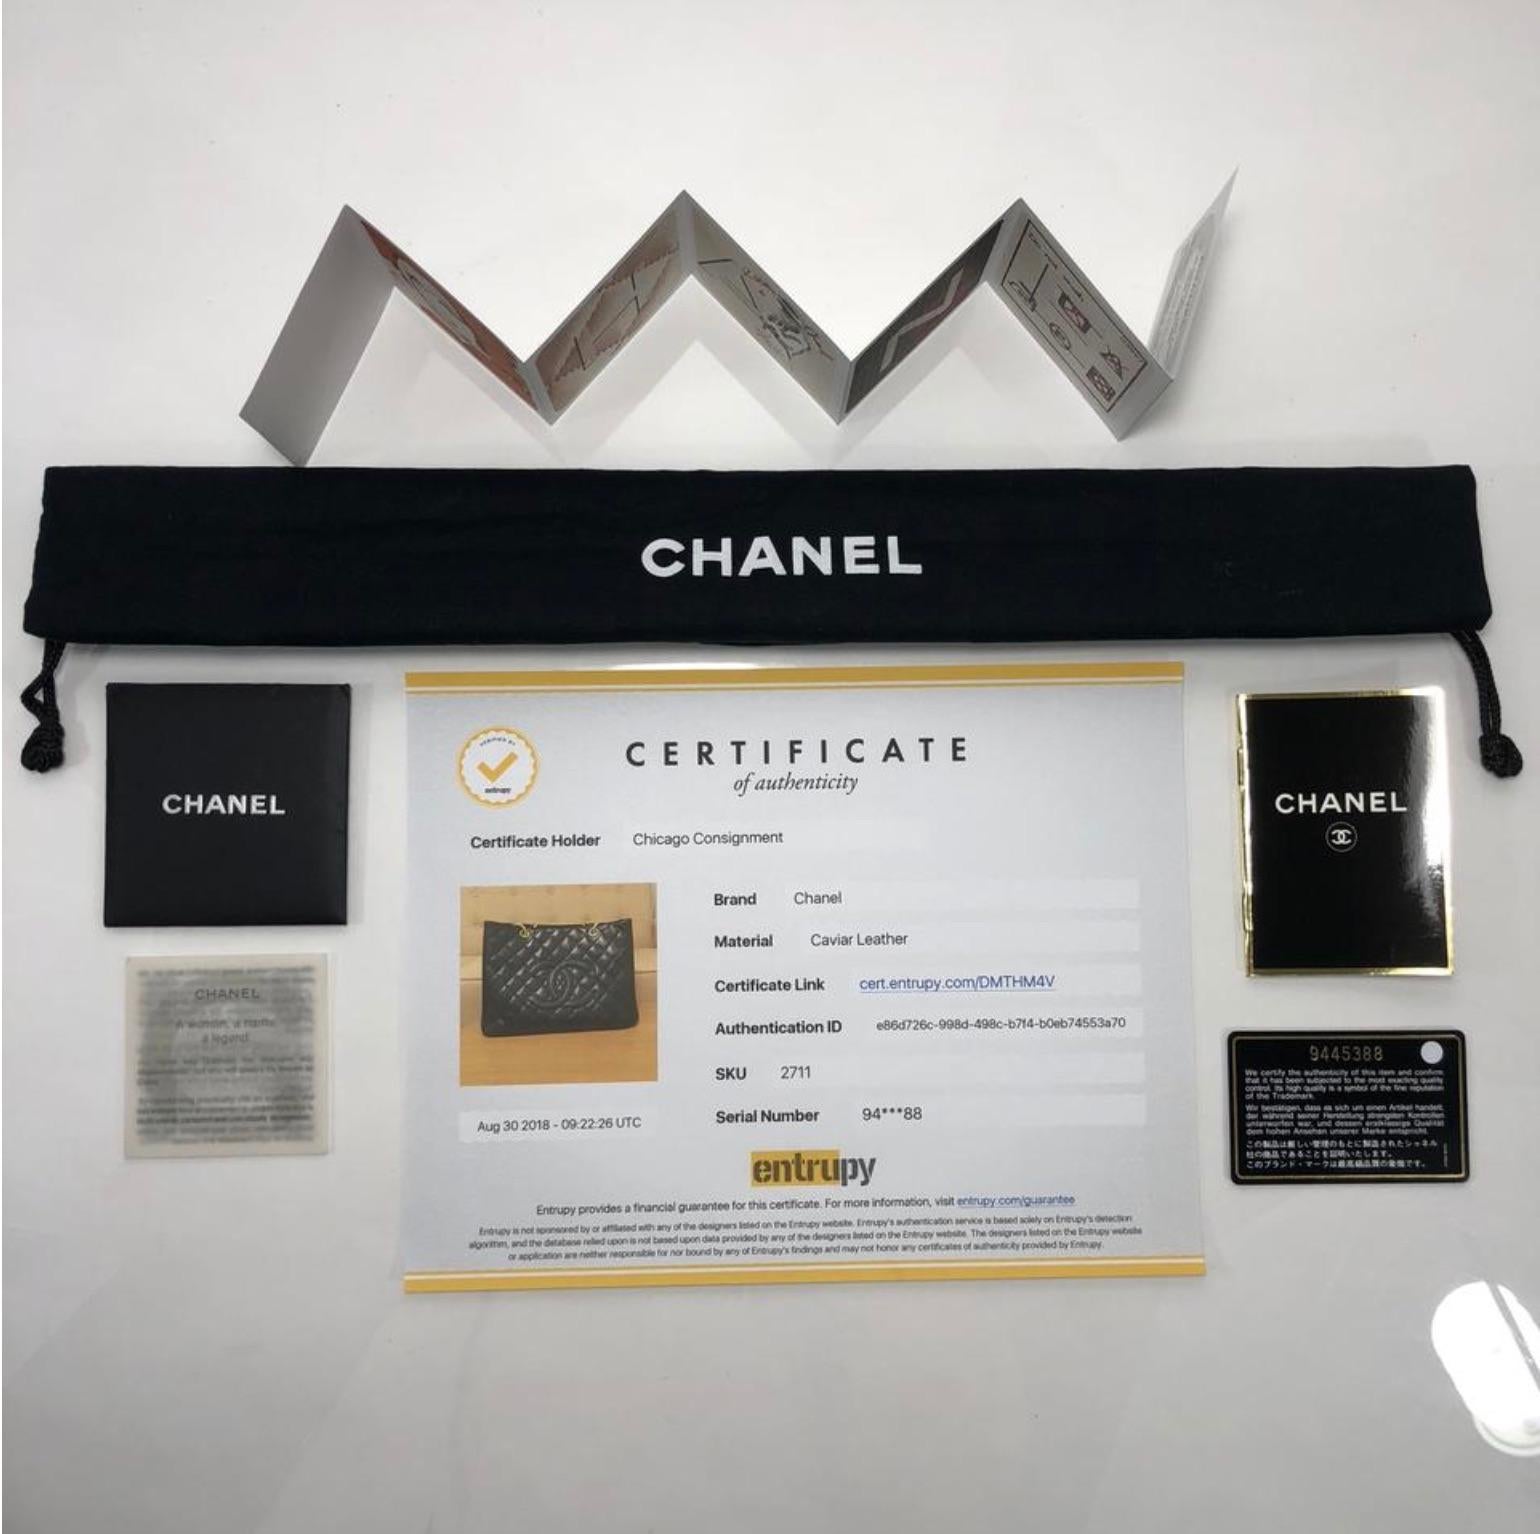 MODEL - Chanel Caviar Leather Grand Shopping Tote with Gold Hardware in Black Shoulder Handbag

CONDITION - Exceptional!  No watermarks, no handle darkening, no dryness.  Bright and shiny hardware with no tarnishing.  No rips, holes, tears, stains